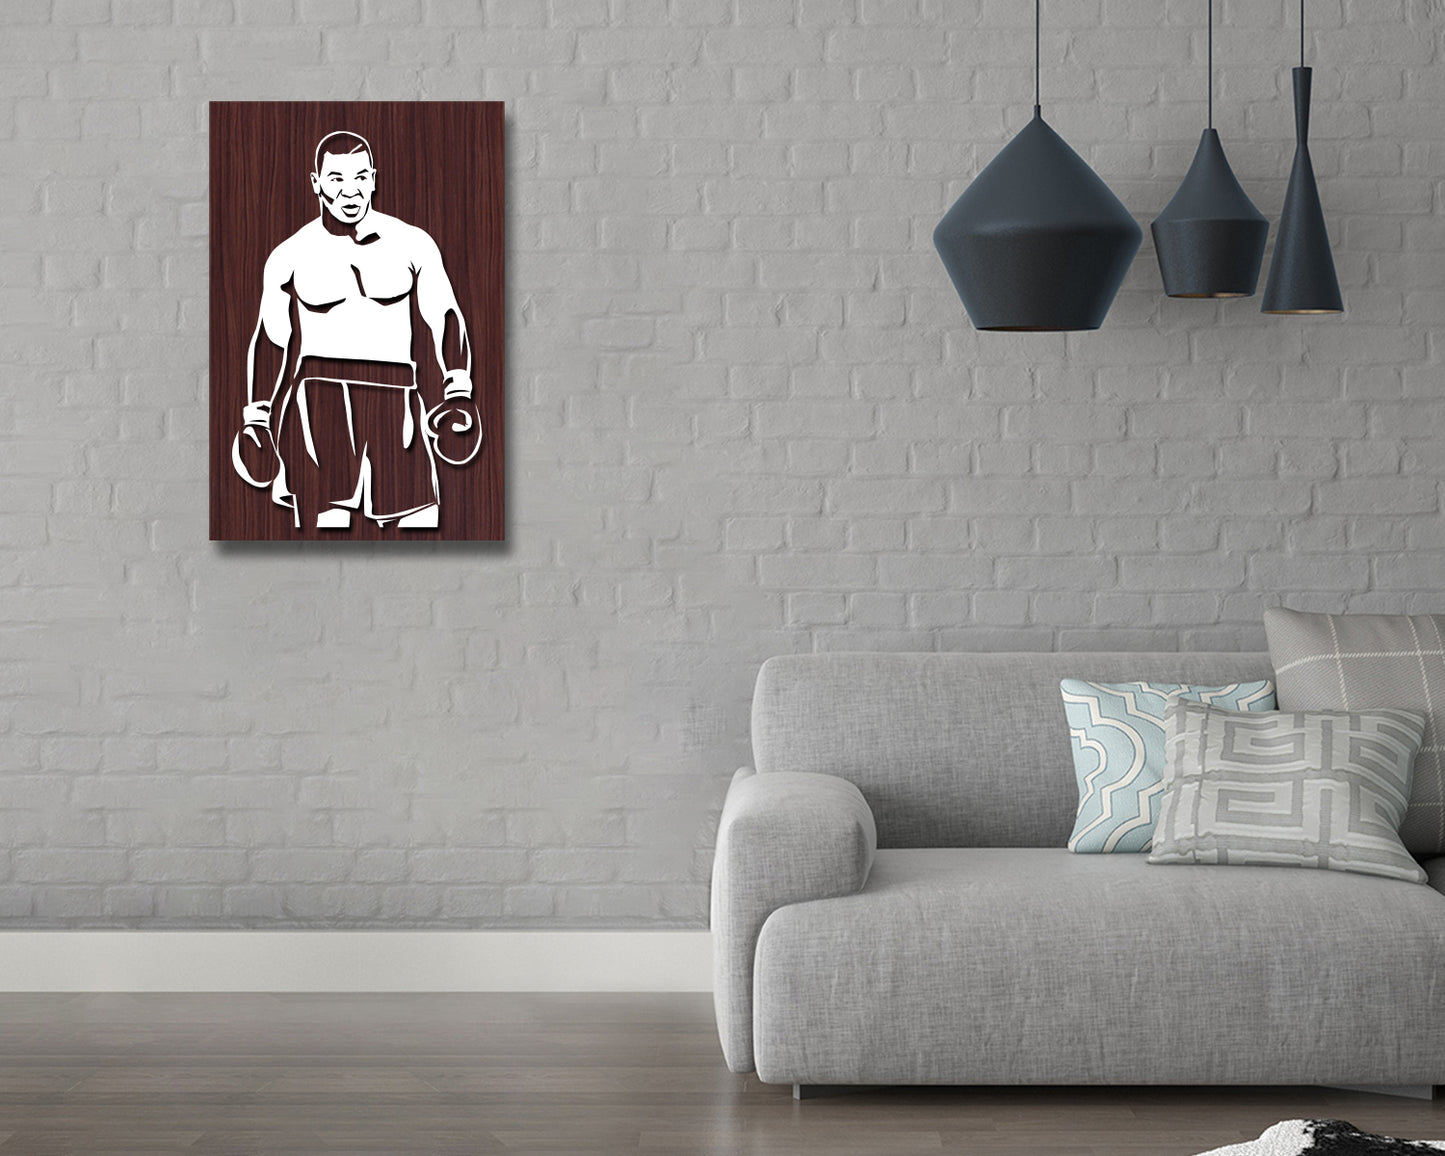 Mike Tyson LED Wooden Decal 